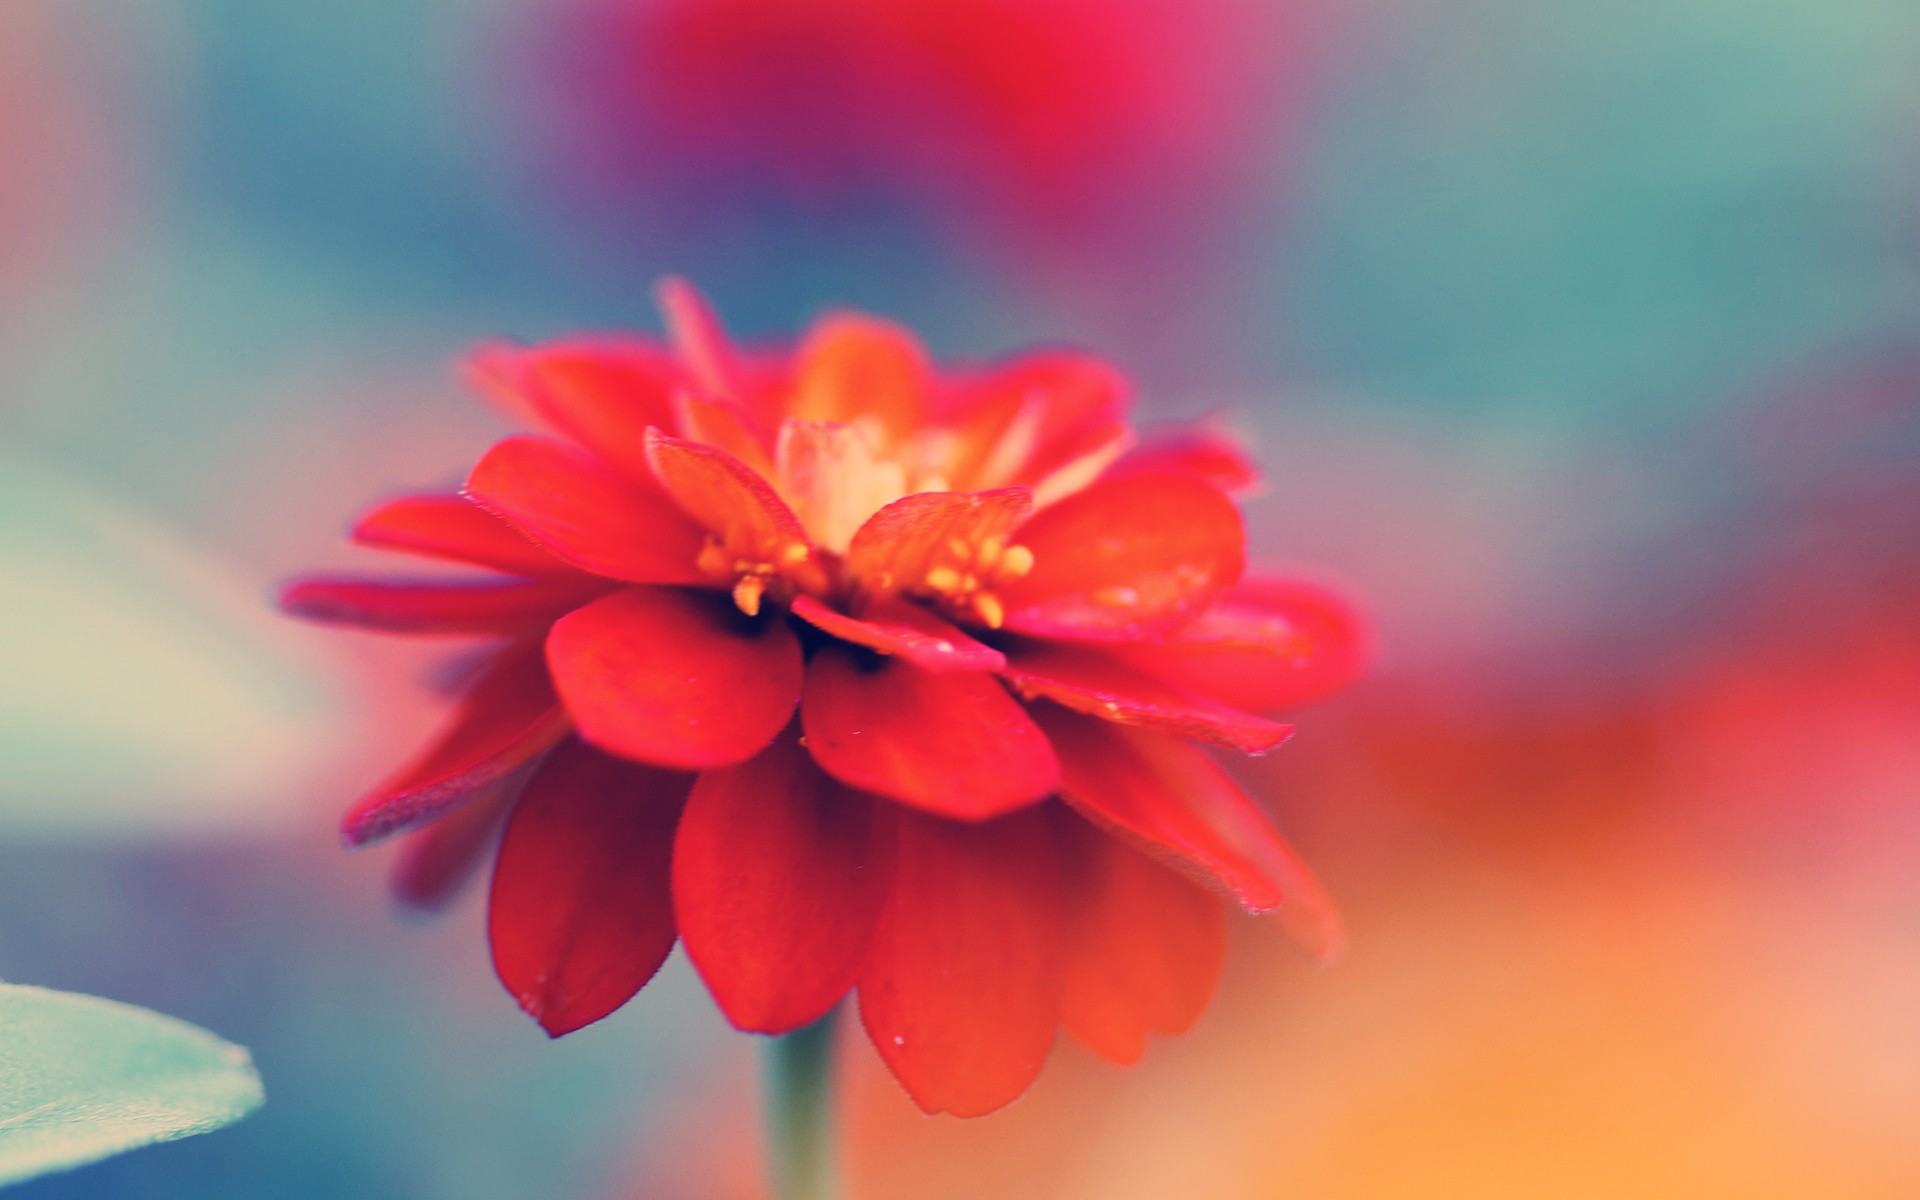 Red Mao Flower Macro Stock Photos Wallpaper Of Smartphone Hd Images ...